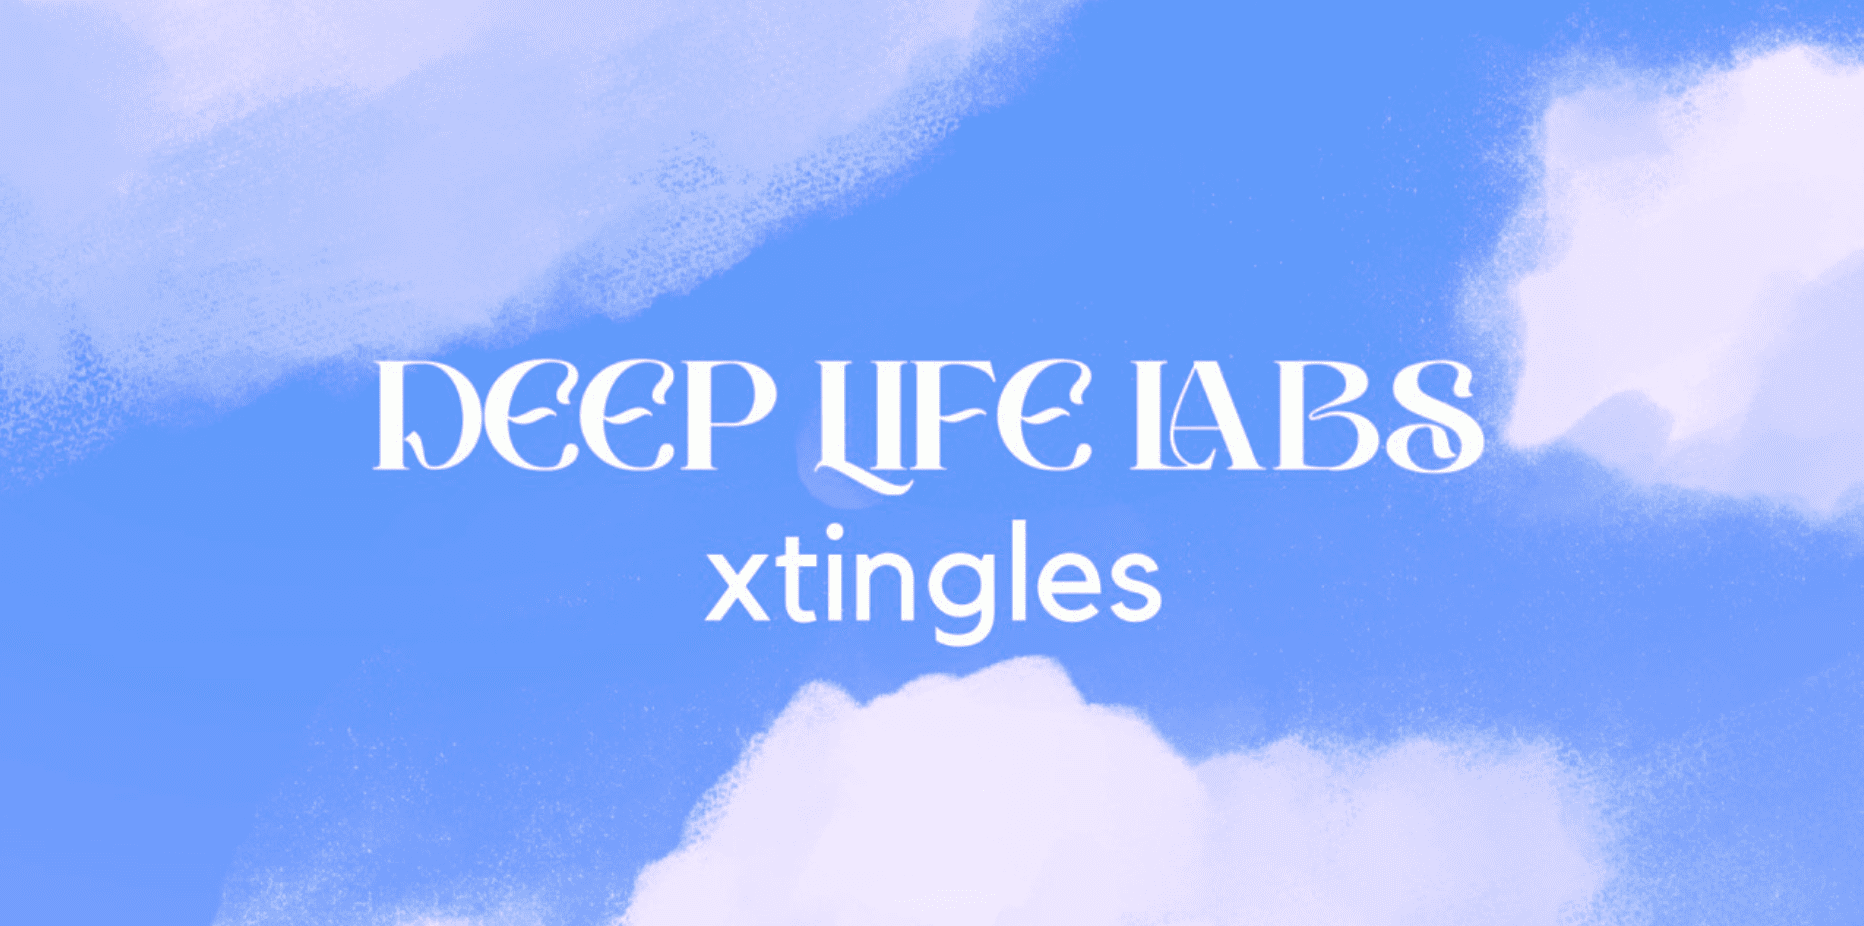 Non-Fungible Token (NFT) Collection - xtingles Expands its Effort to Bring Wellness into Web3 Through Deep Life Labs